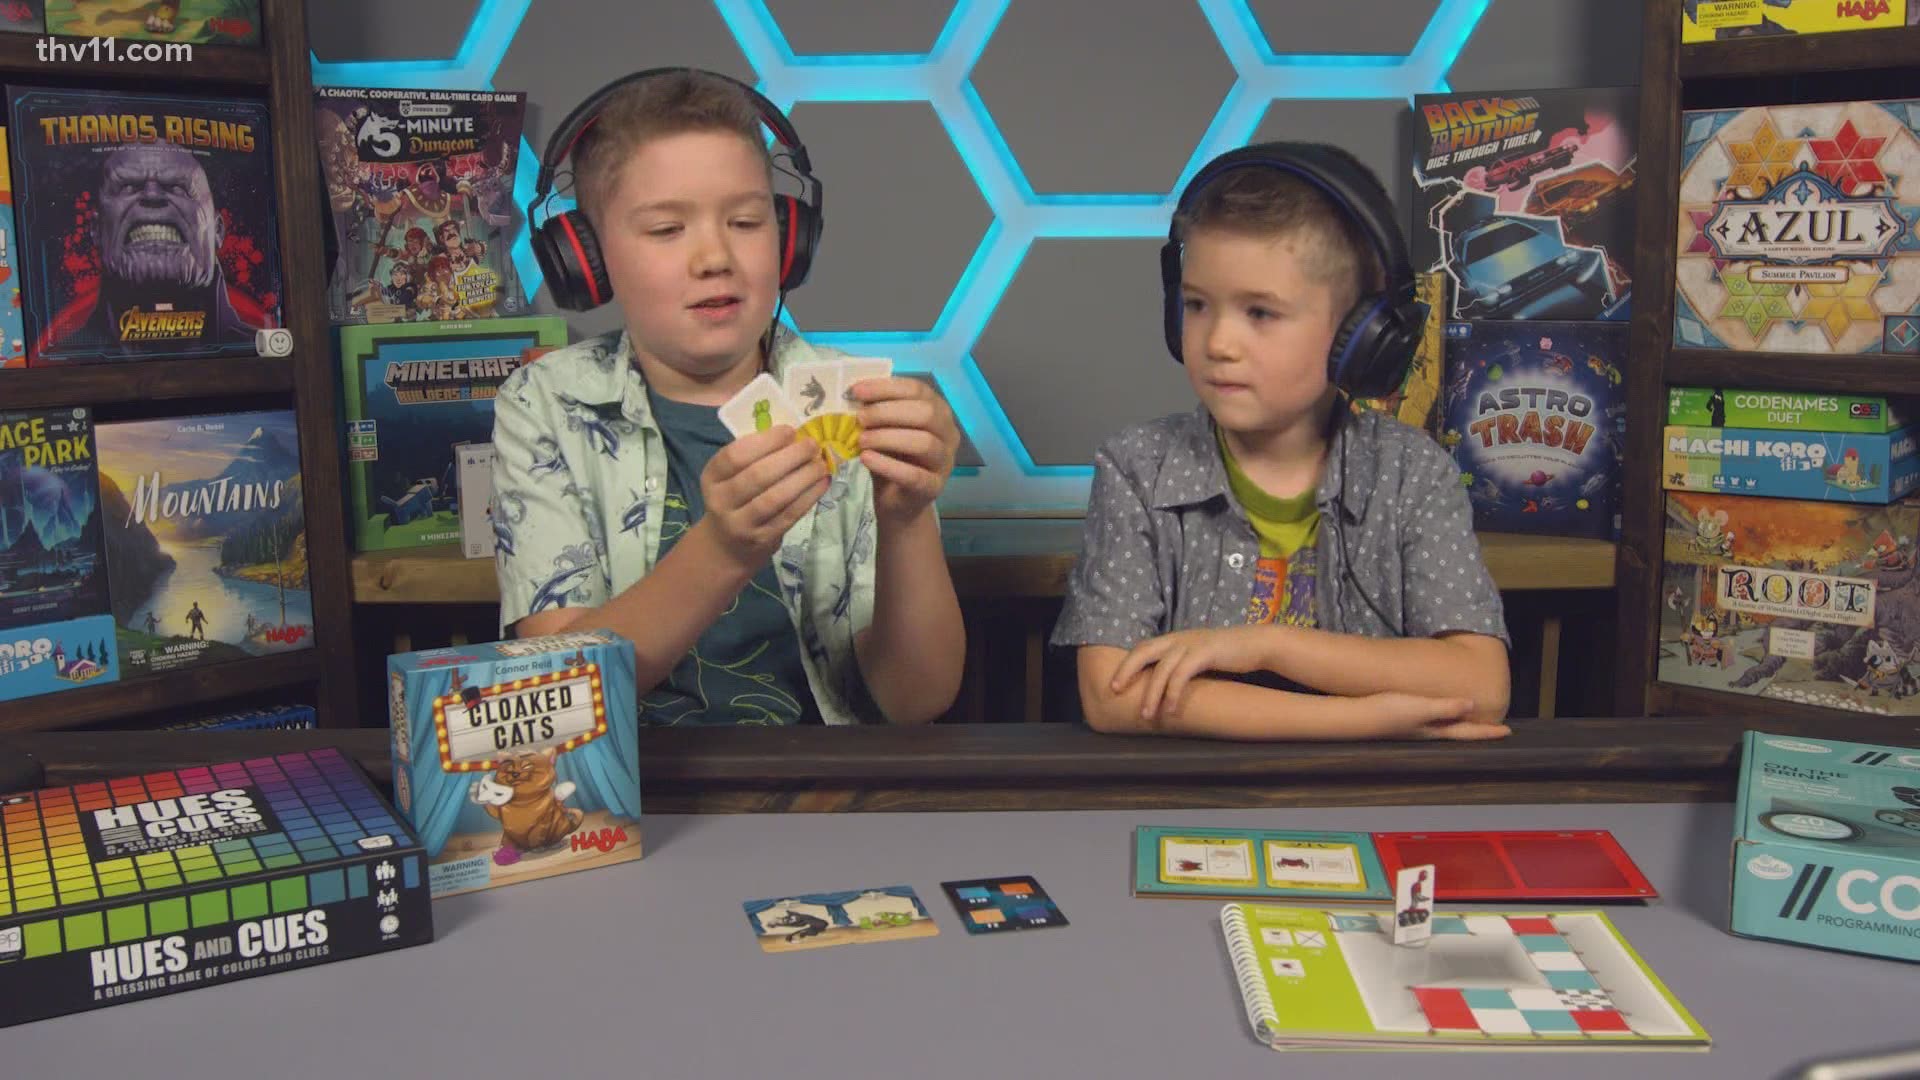 Jarred and Peyton teach us about fun and educational board games. They have a YouTube channel called “Kidsplaining” where they test out board games.